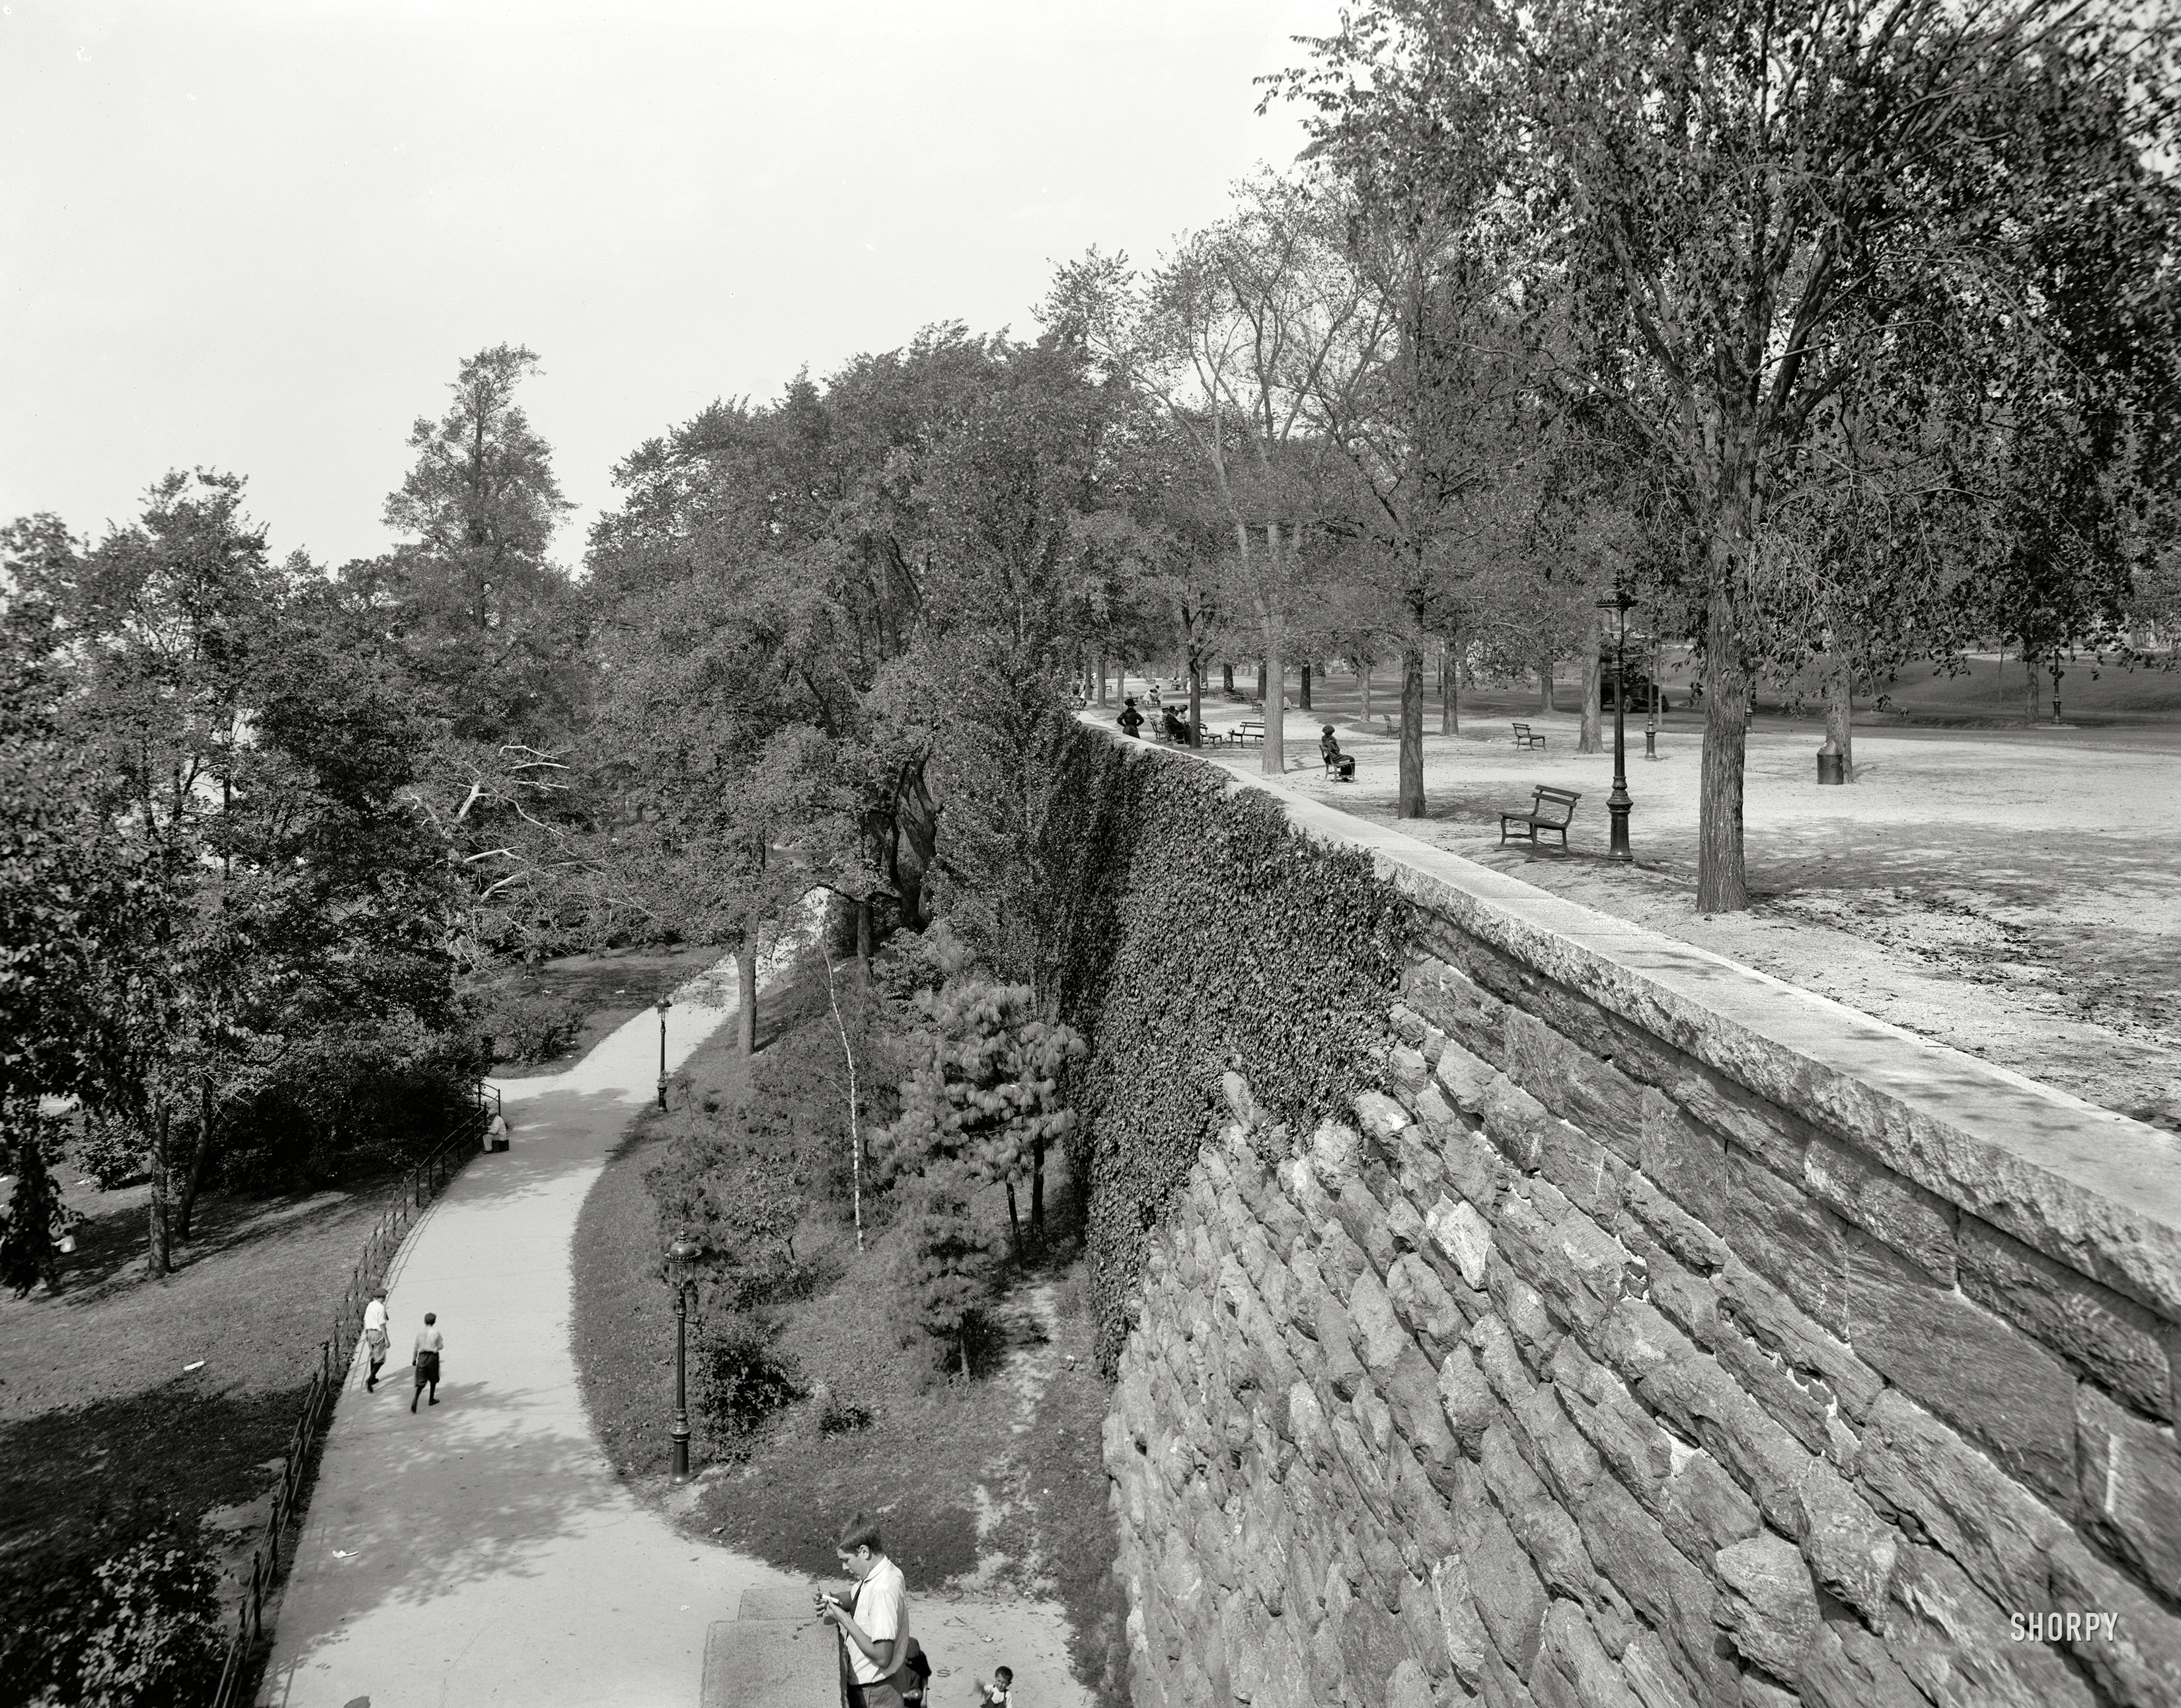 Circa 1910. "Riverside Park, New York." And the ledge that launched a thousand boys. 8x10 inch glass negative, Detroit Publishing Company. View full size.